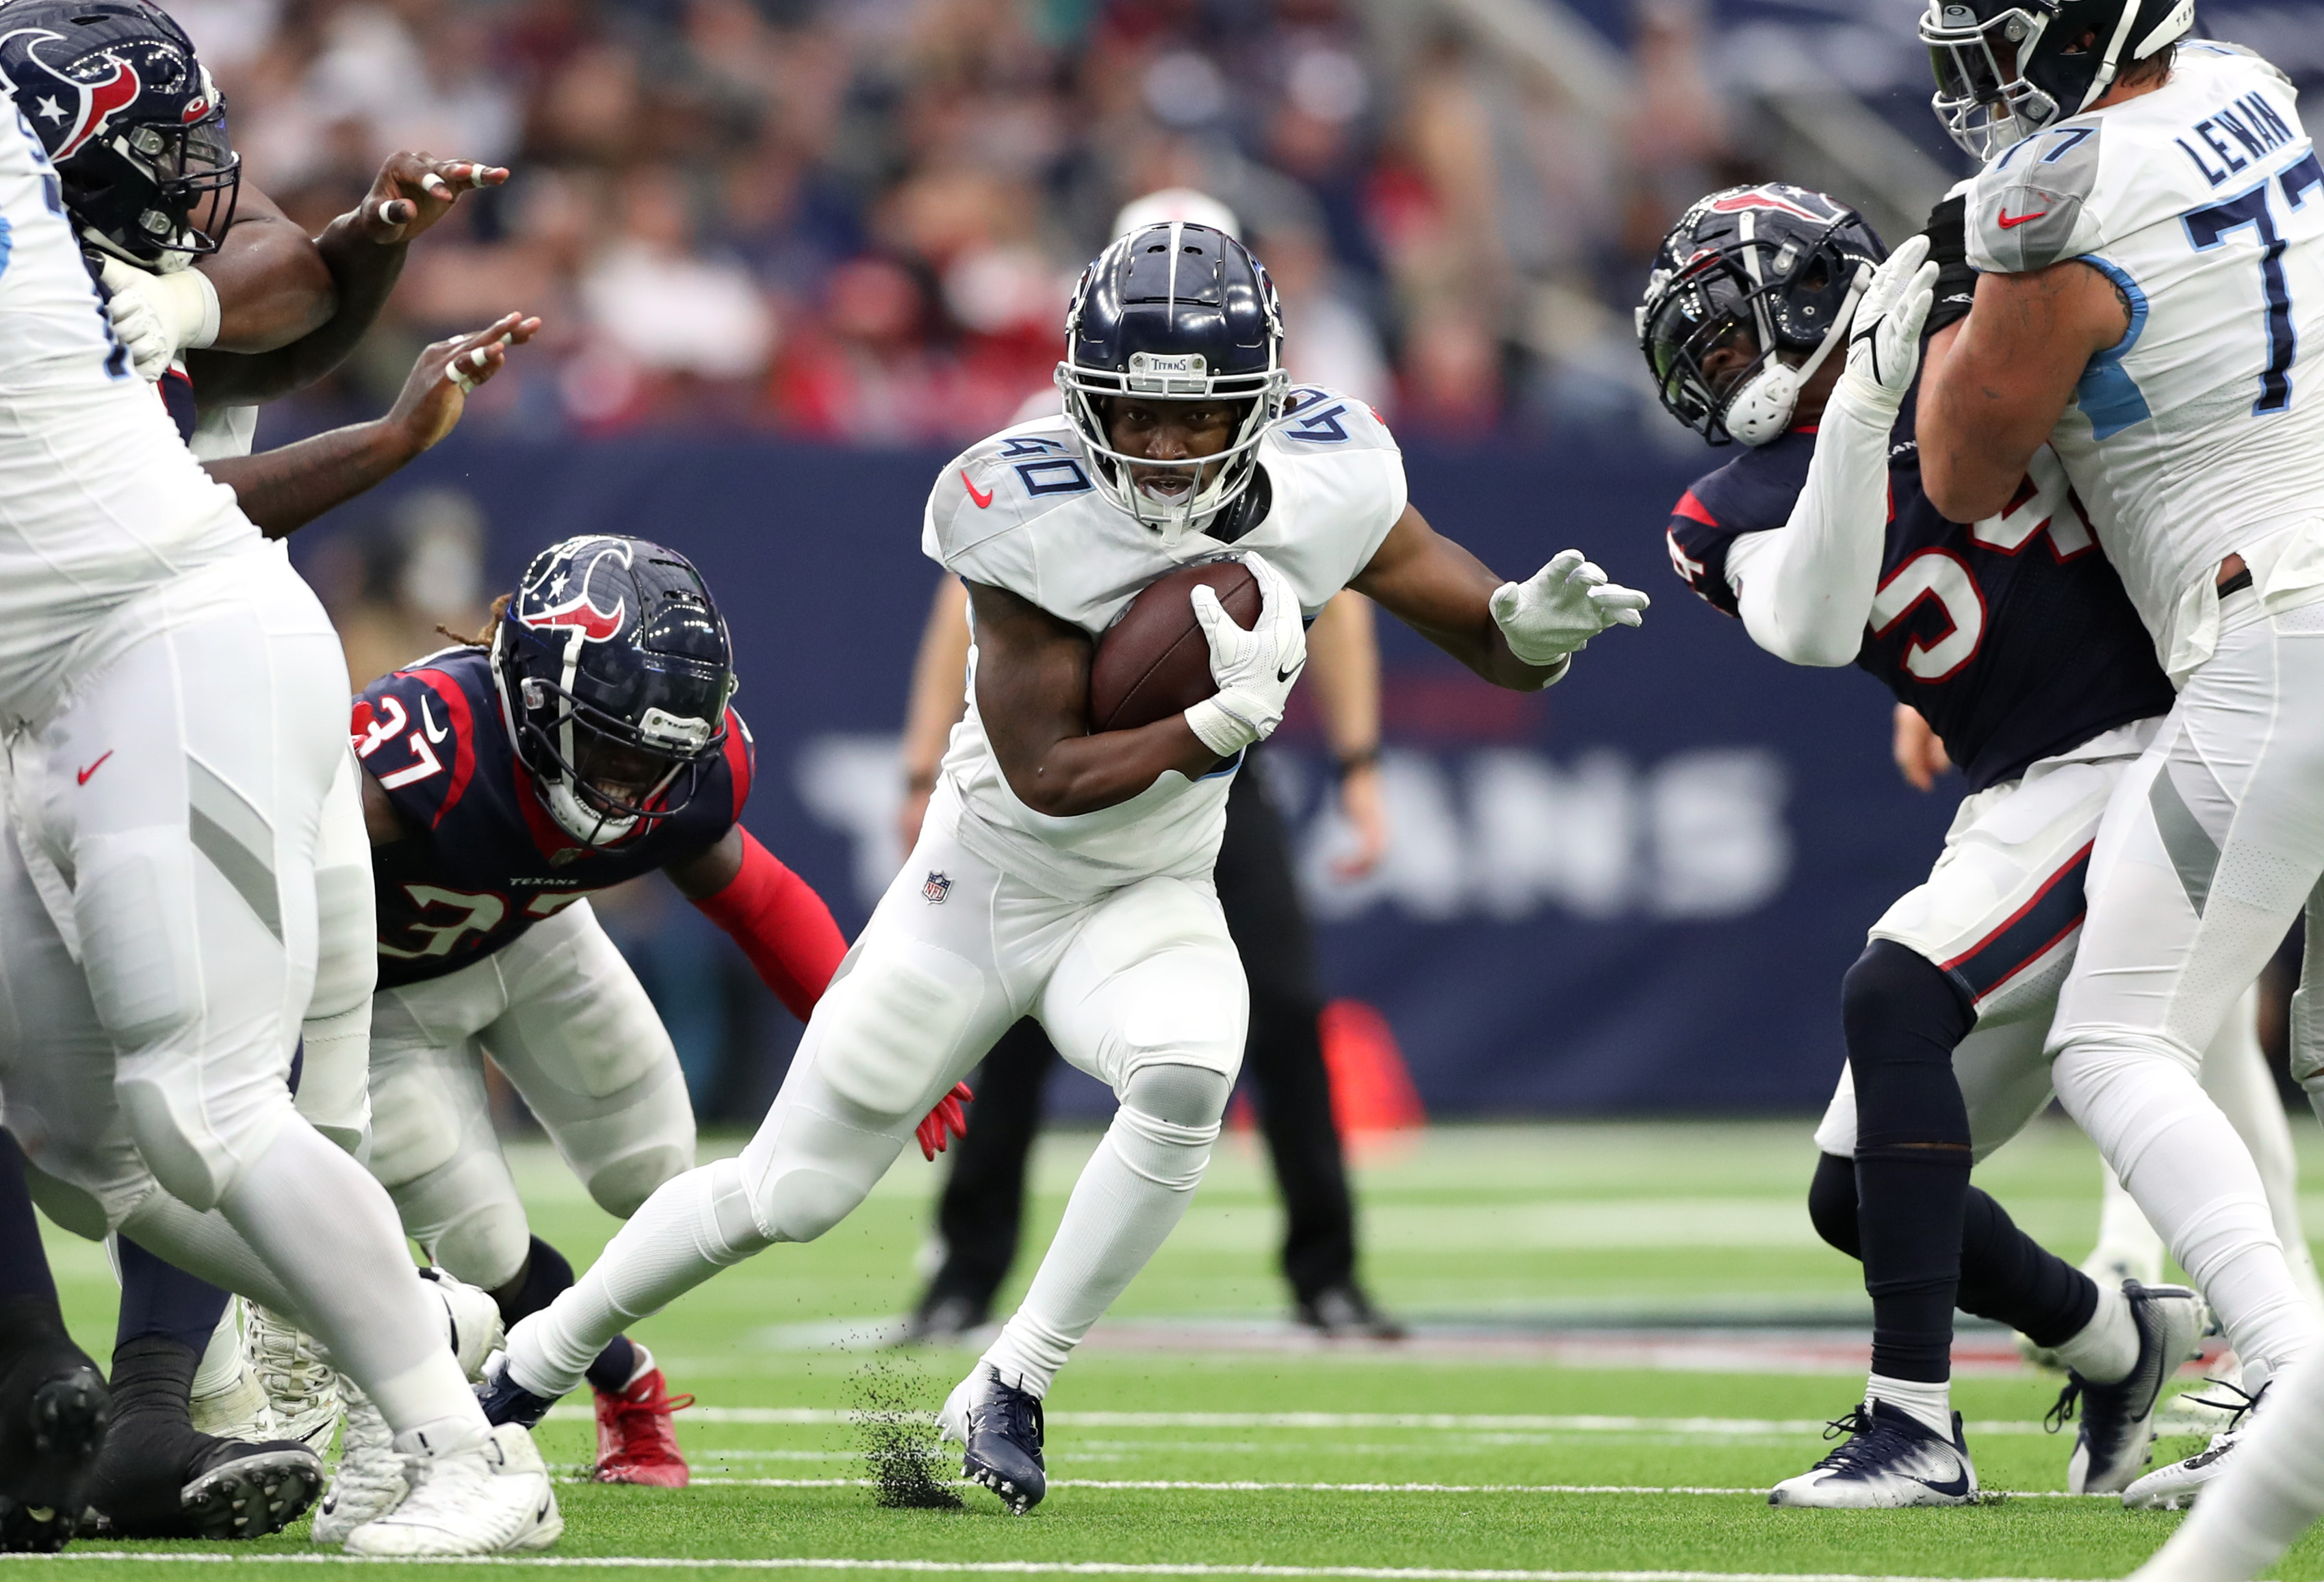 Dontrell Hilliard #40 of the Tennessee Titans runs the ball during the second quarter against the Houston Texans at NRG Stadium on January 09, 2022 in Houston, Texas.